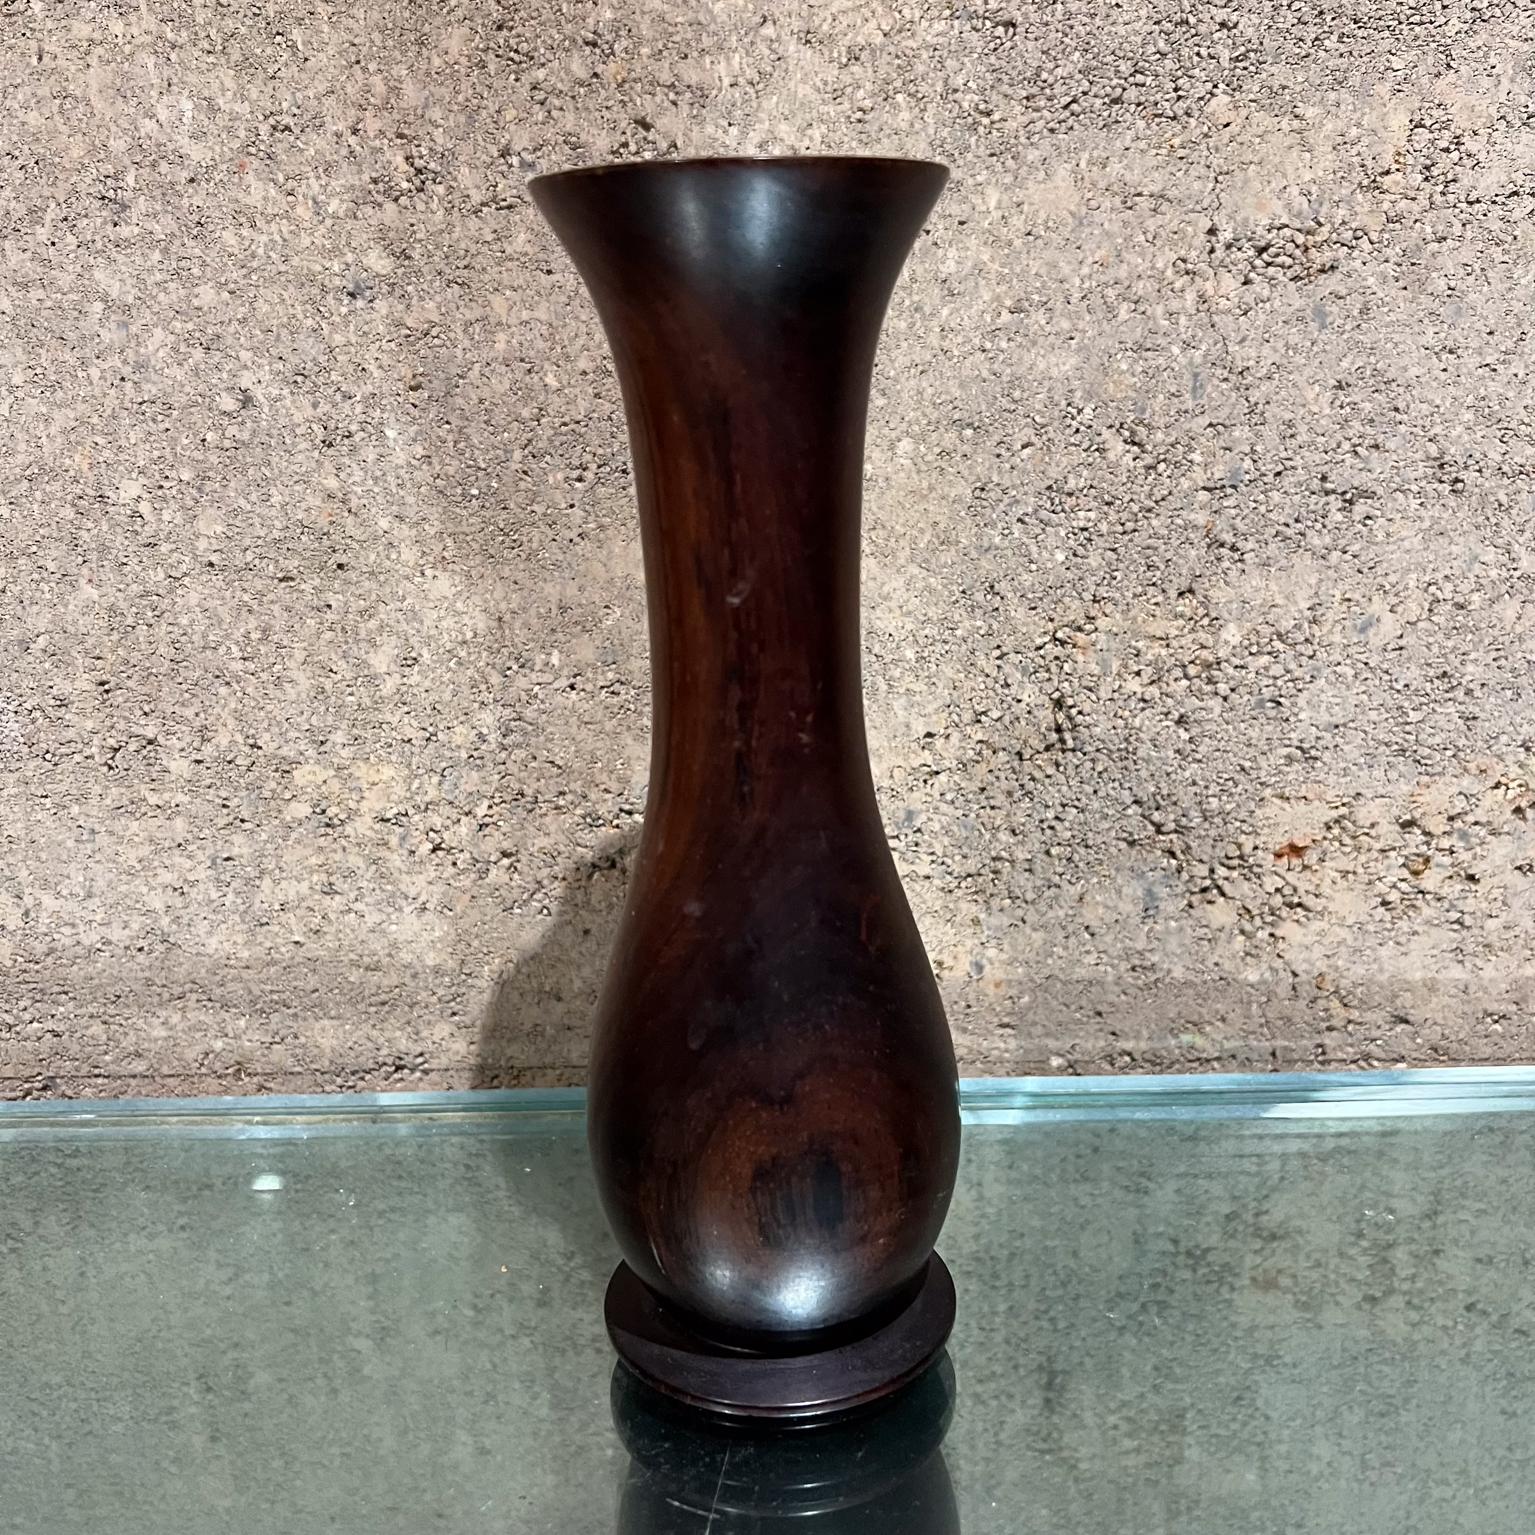 
1970s Modernist Rosewood Palisander Turned Wood Vase
One nick on upper lip.
Preowned original unrestored vintage condition.
See all images.
No signature
8 h x 2.63 diameter